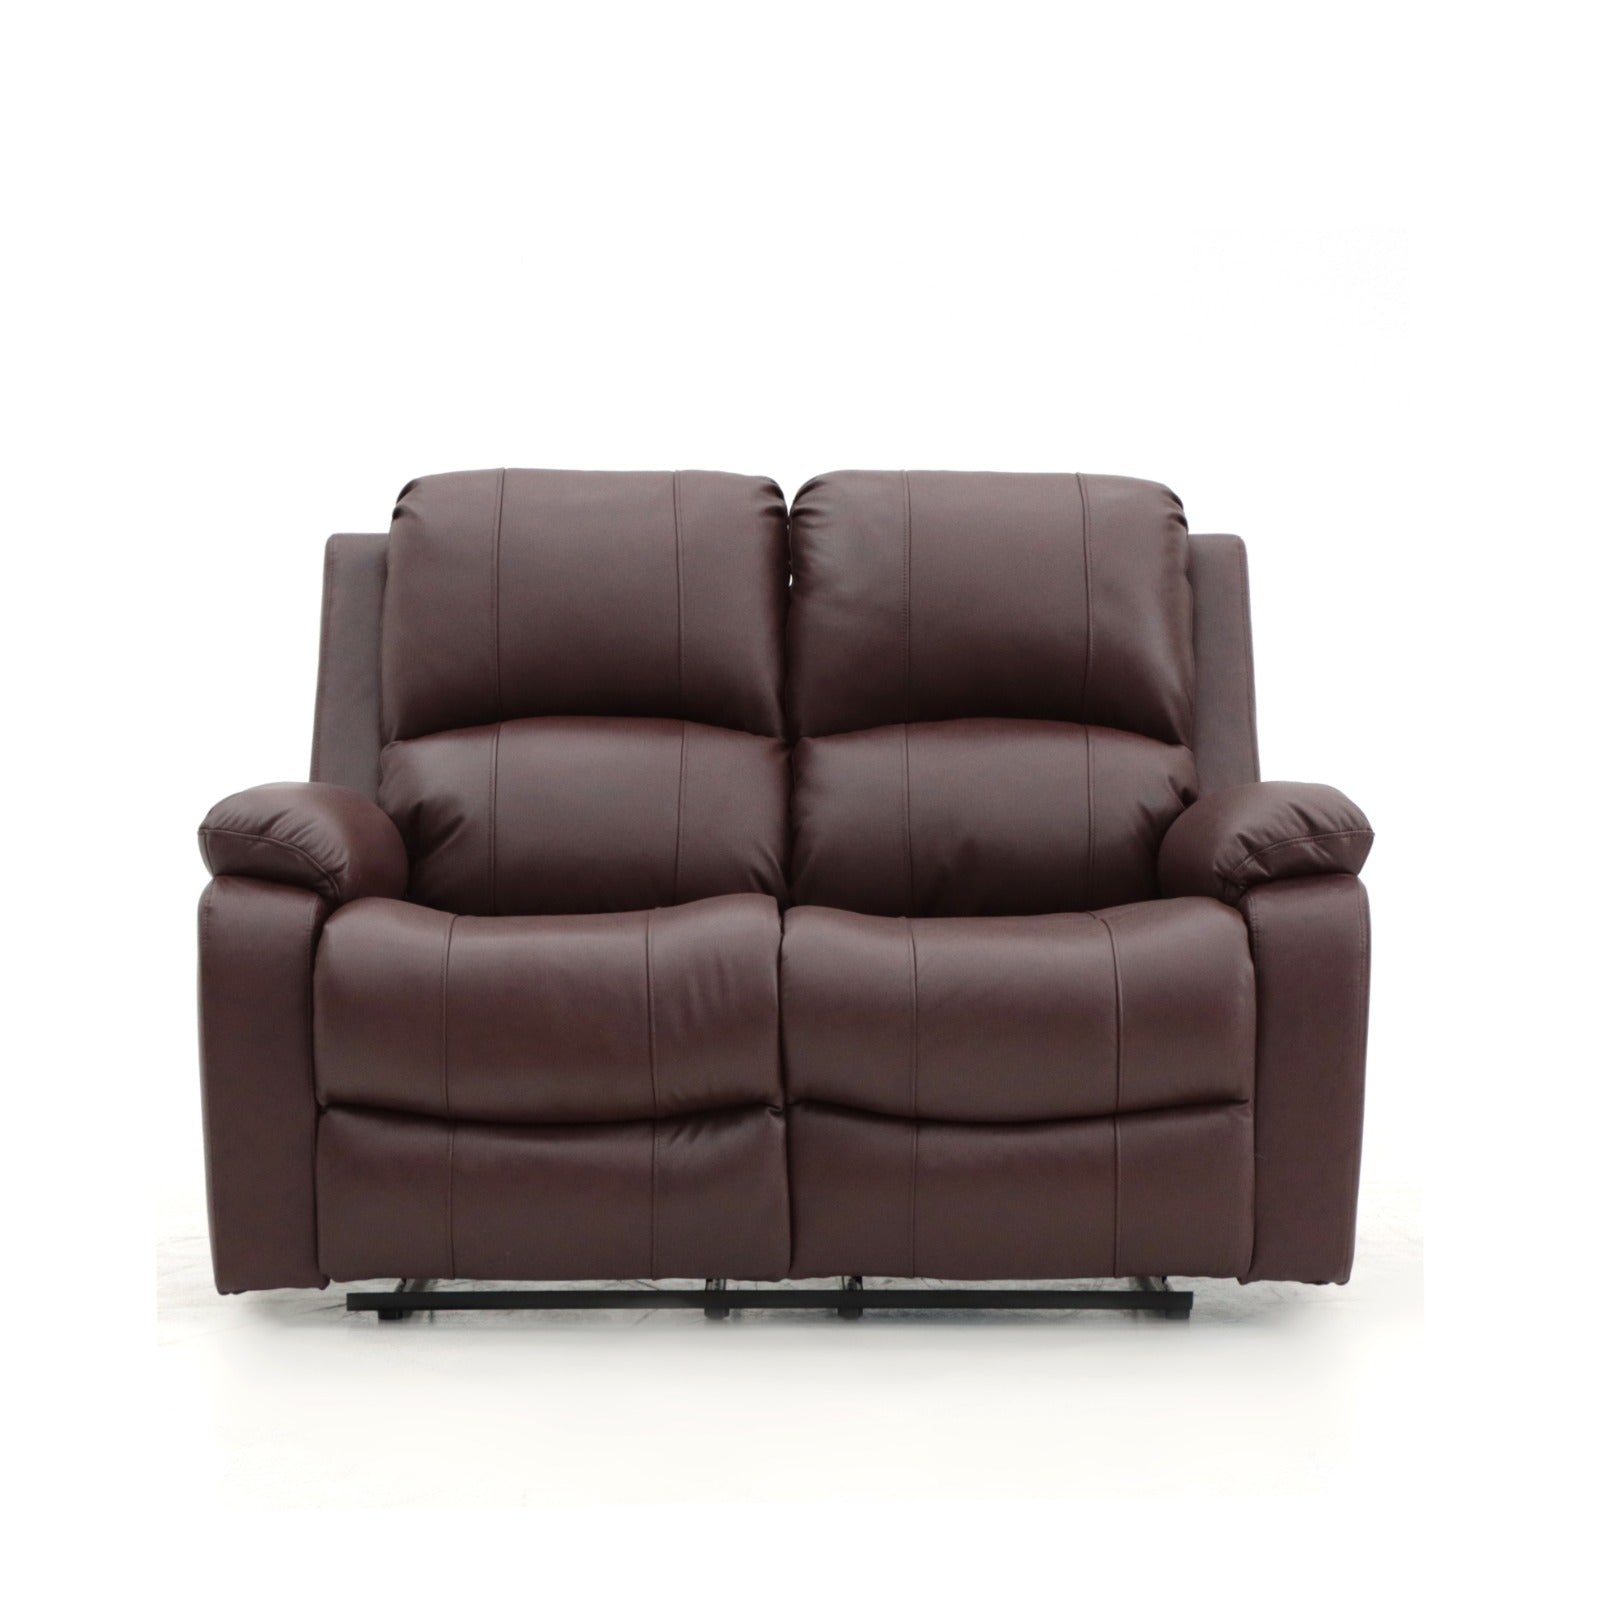 Aston 3 Seater and 2 Seater Manual Recliner Chestnut Leather